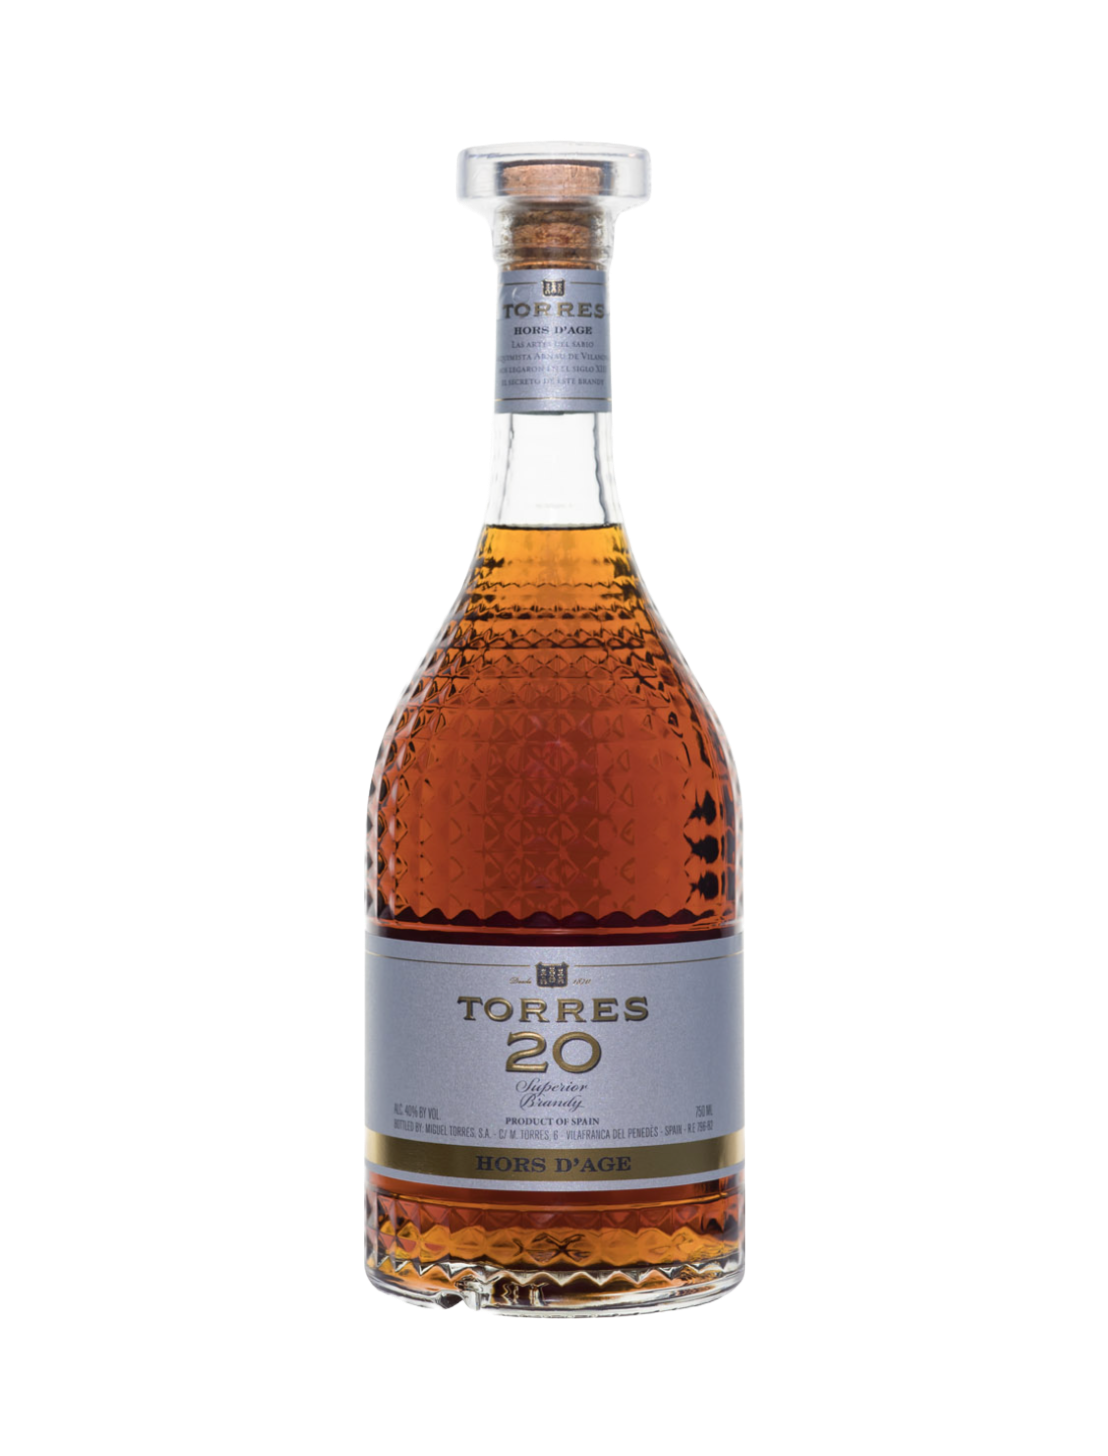 Elegant brandy bottle with dark amber hue, hinting at rich vanilla, cinnamon, and nutmeg flavors within.